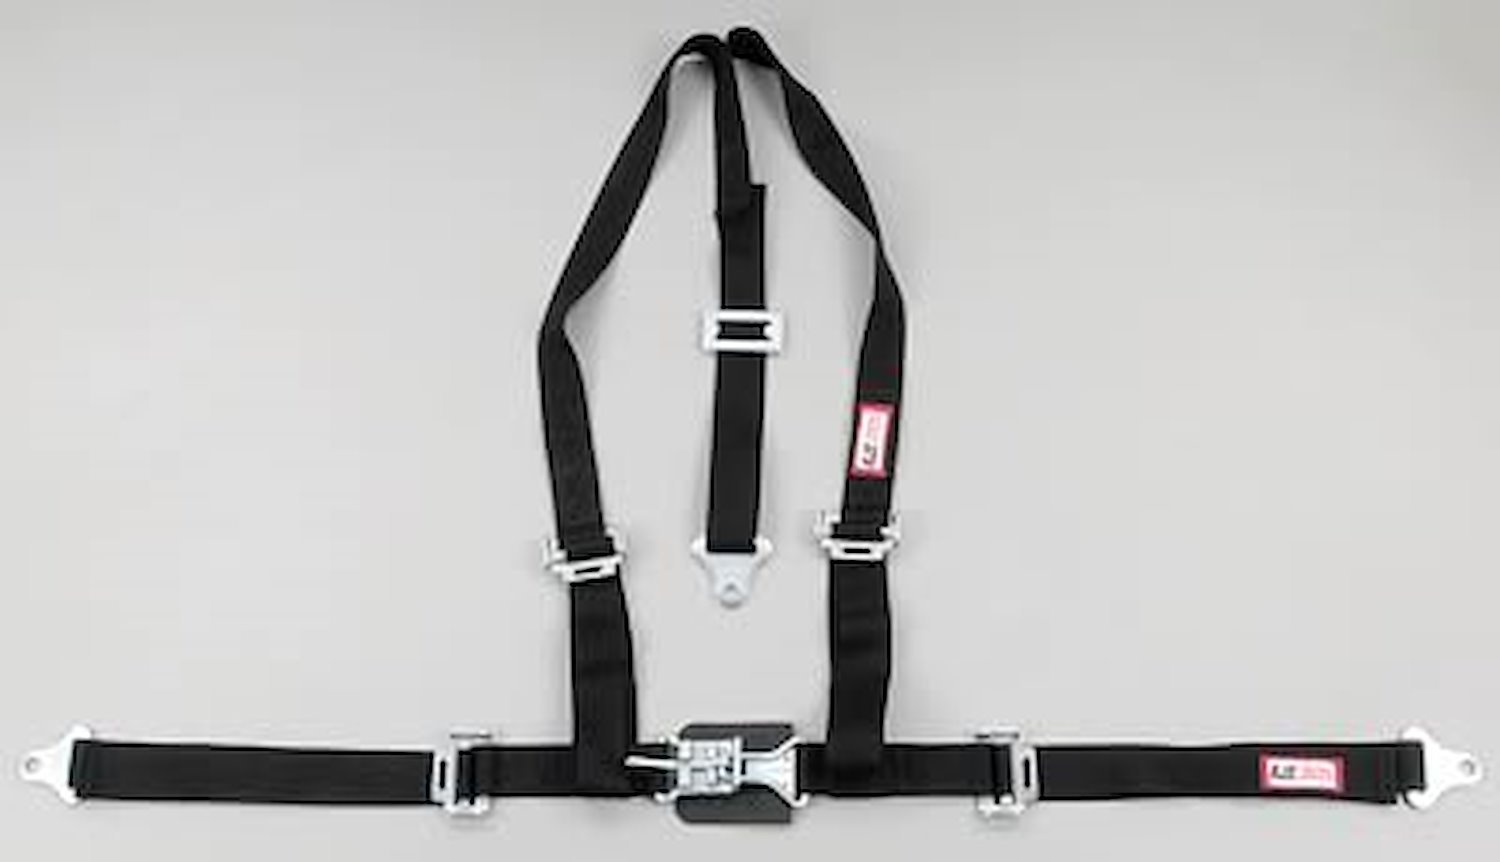 NON-SFI L&L HARNESS 2 PULL DOWN Lap Belt SNAP SEWN IN 2 S.H. INDIVIDUAL FLOOR Mount w/STERNUM STRAP WRAP/SNAP PURPLE